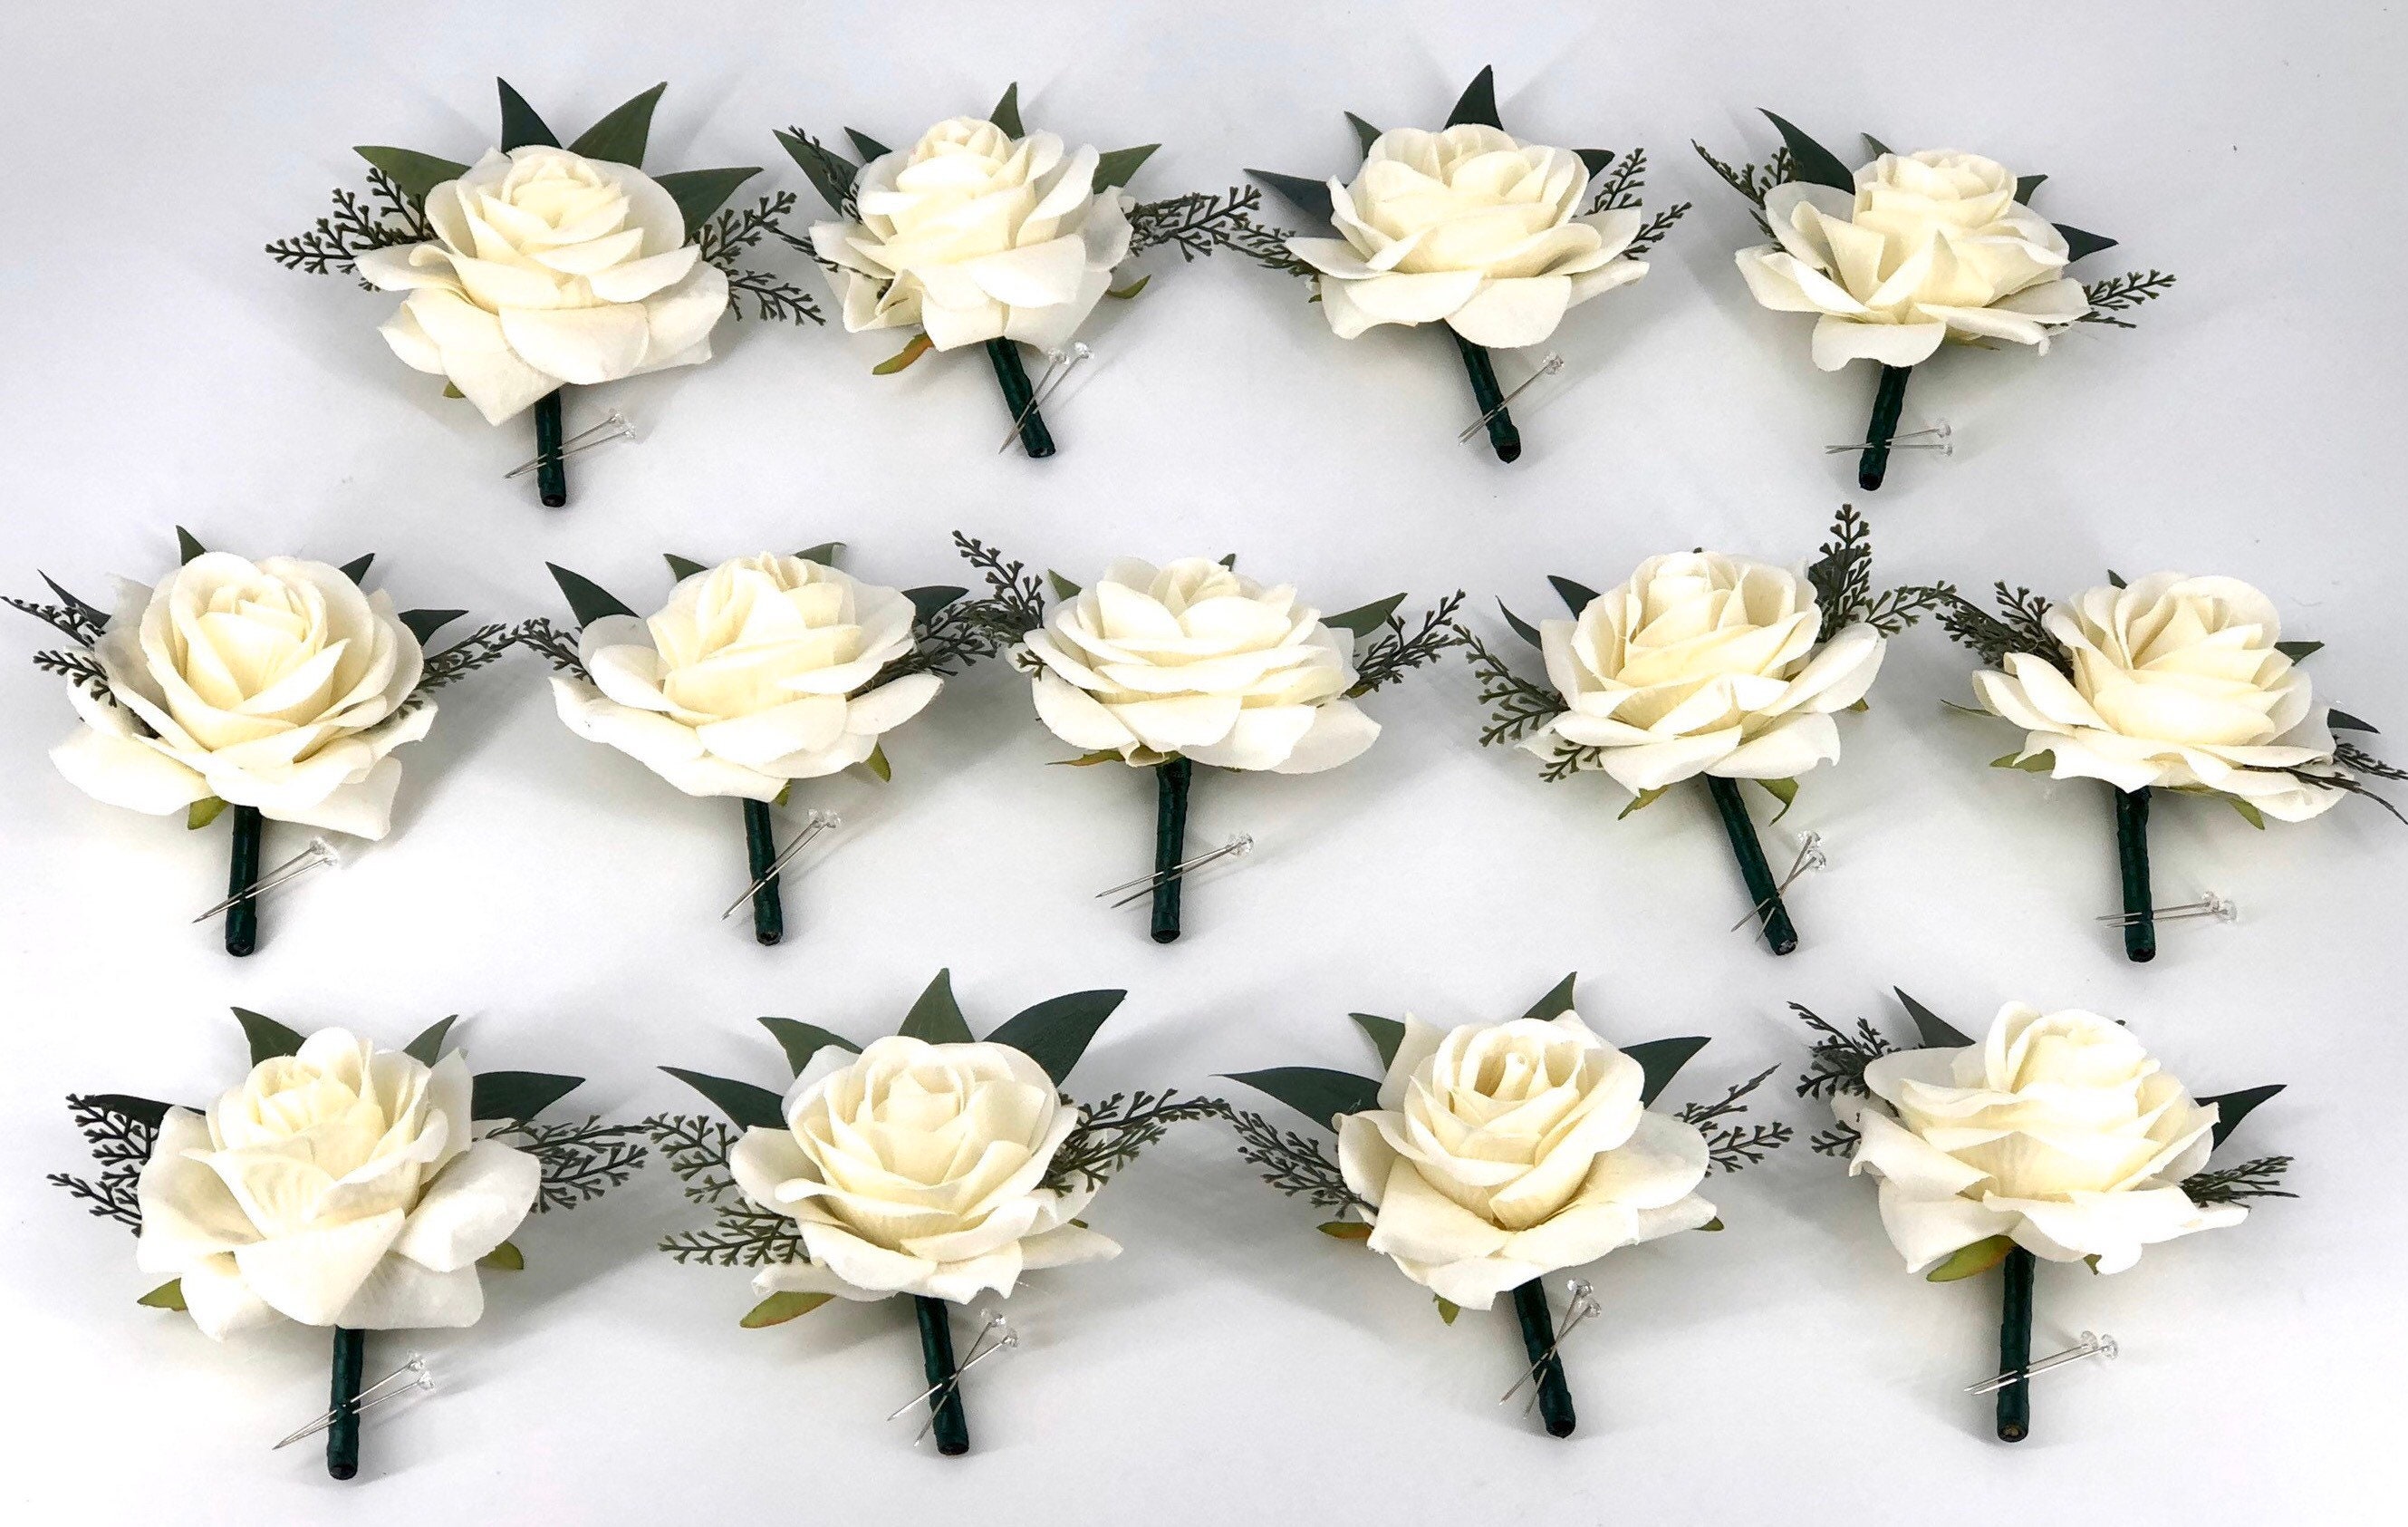 Decorative Flowers Corsage Magnetic Buckle Boutonniere Clips Fixator Small  Flower Holder DIY Magnets Bride Bouquet From Zuiyifu, $14.79